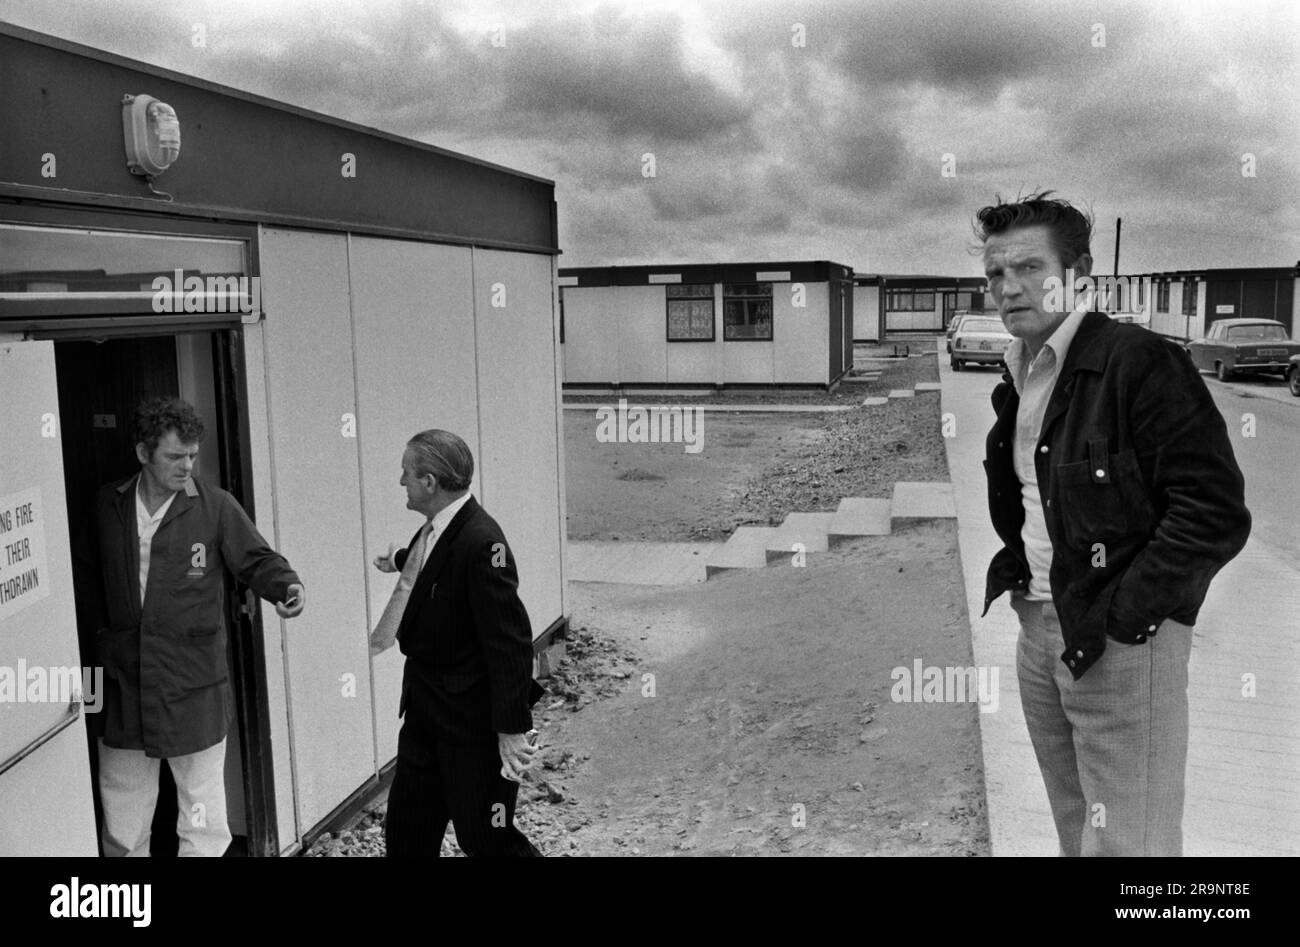 North Sea oil at Sullom Voe Terminal under construction. Construction workers housing site, new workers being shown their accommodation. Sullom Voe, Shetlands Mainland, Shetland Islands, Scotland circa 1979. 1970s HOMER SYKES Stock Photo